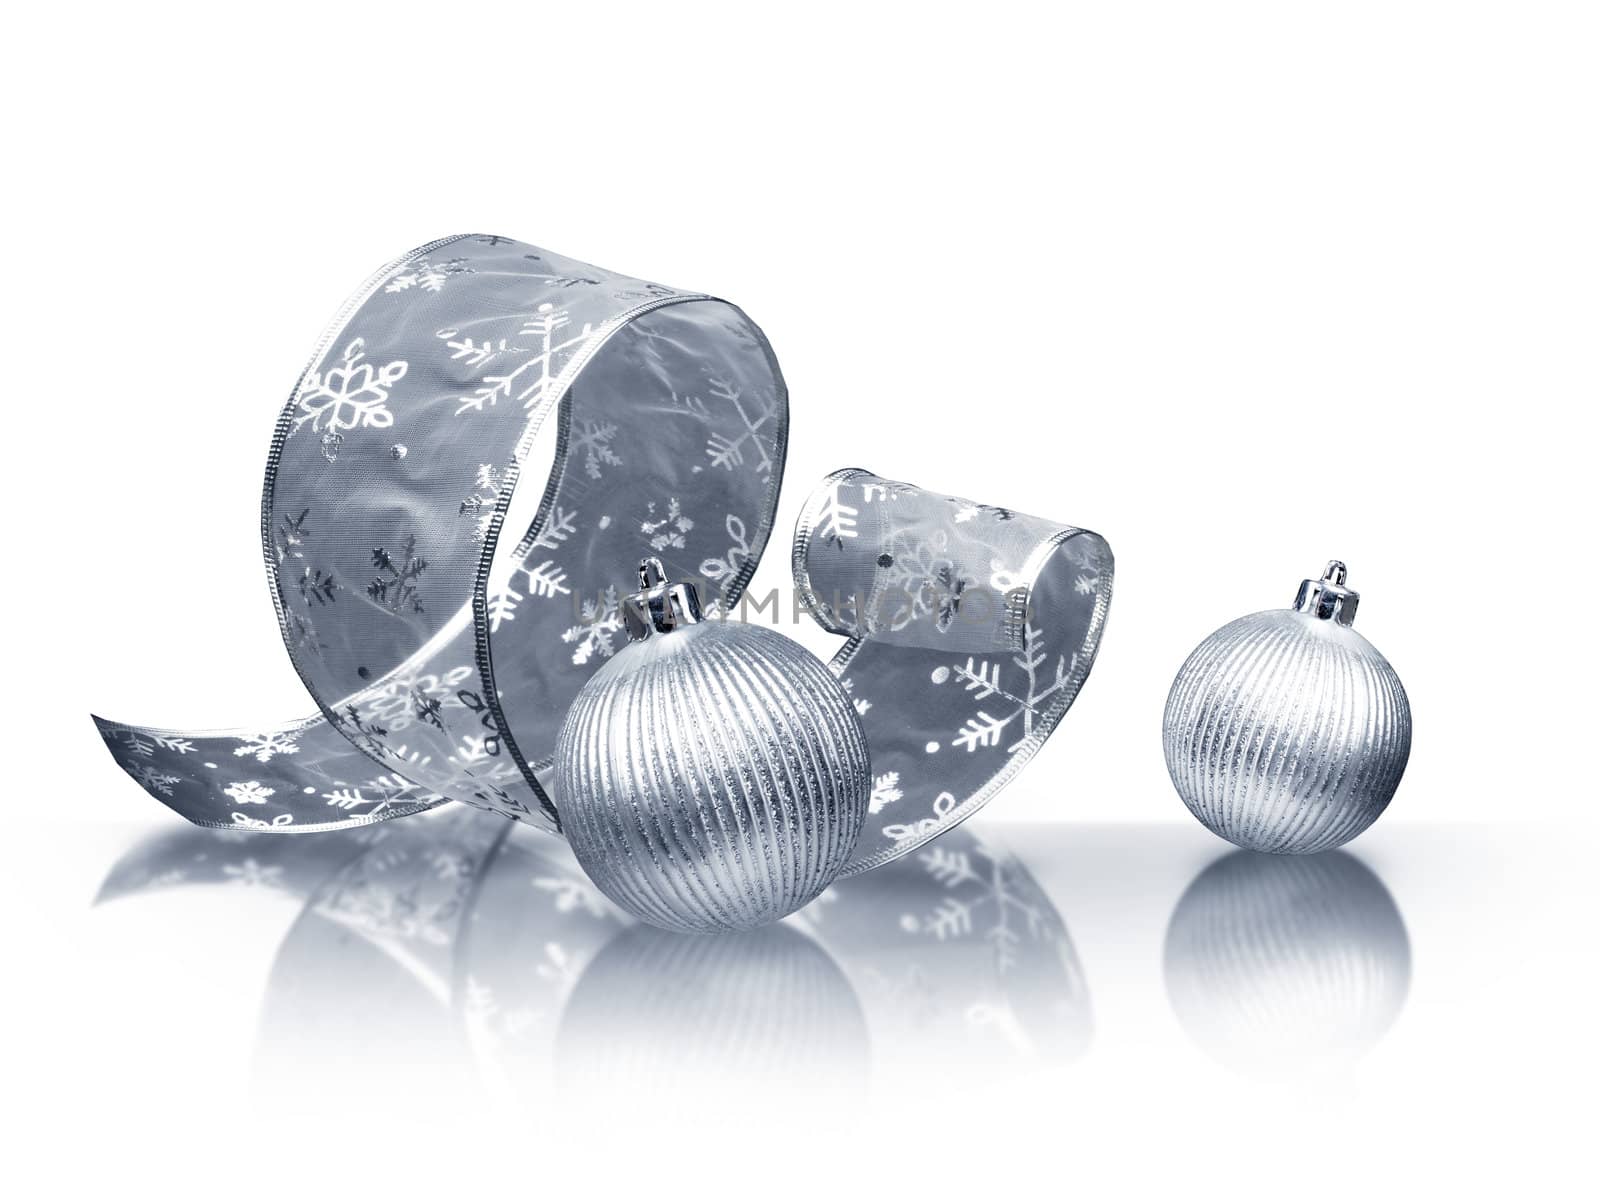 Silver ribbon and Christmas balls by anterovium